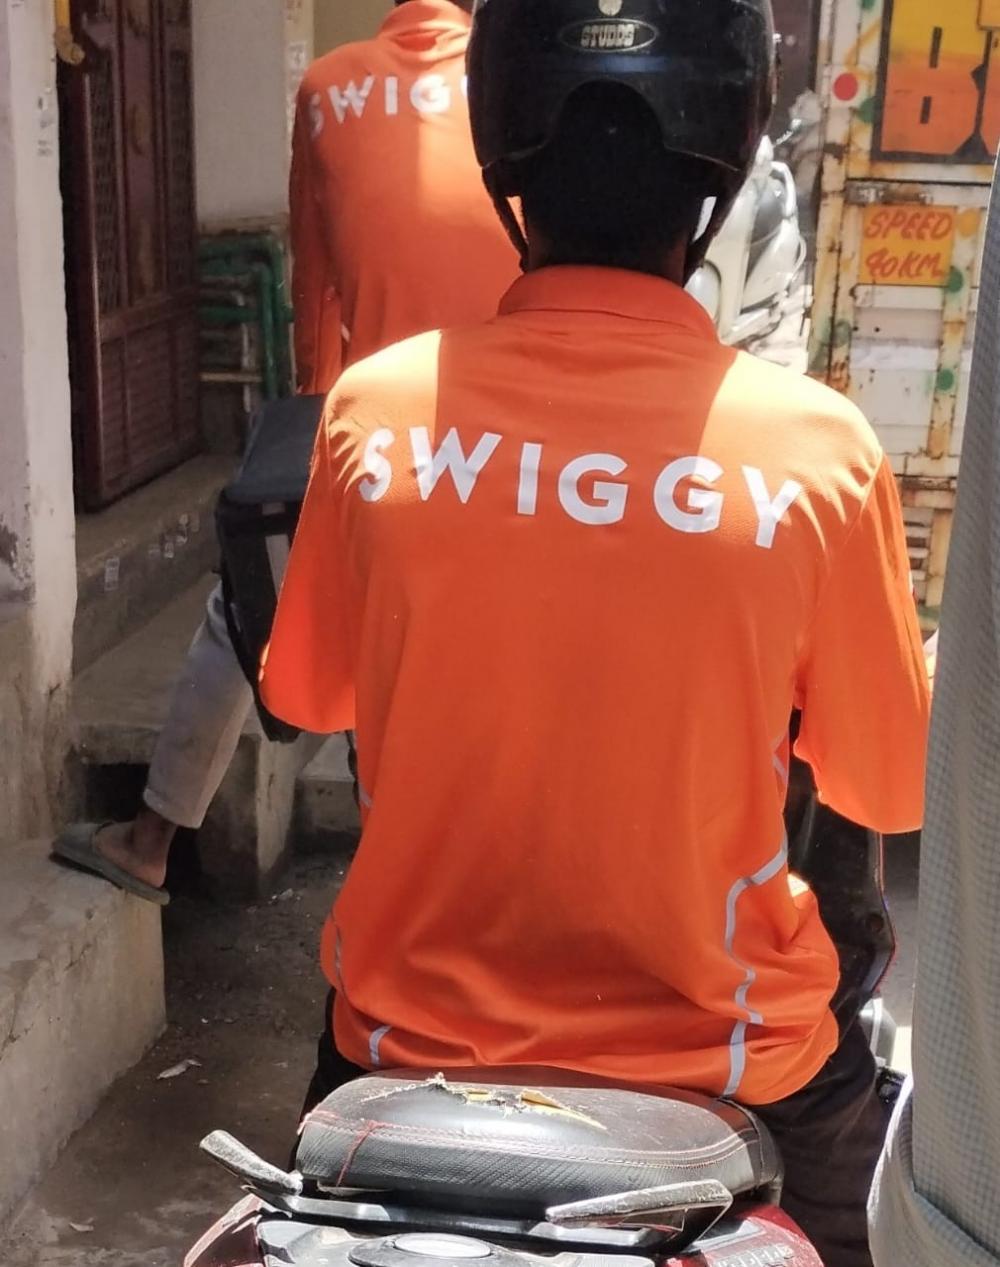 The Weekend Leader - Swiggy offers free skill-based learning to gig workers, their kids